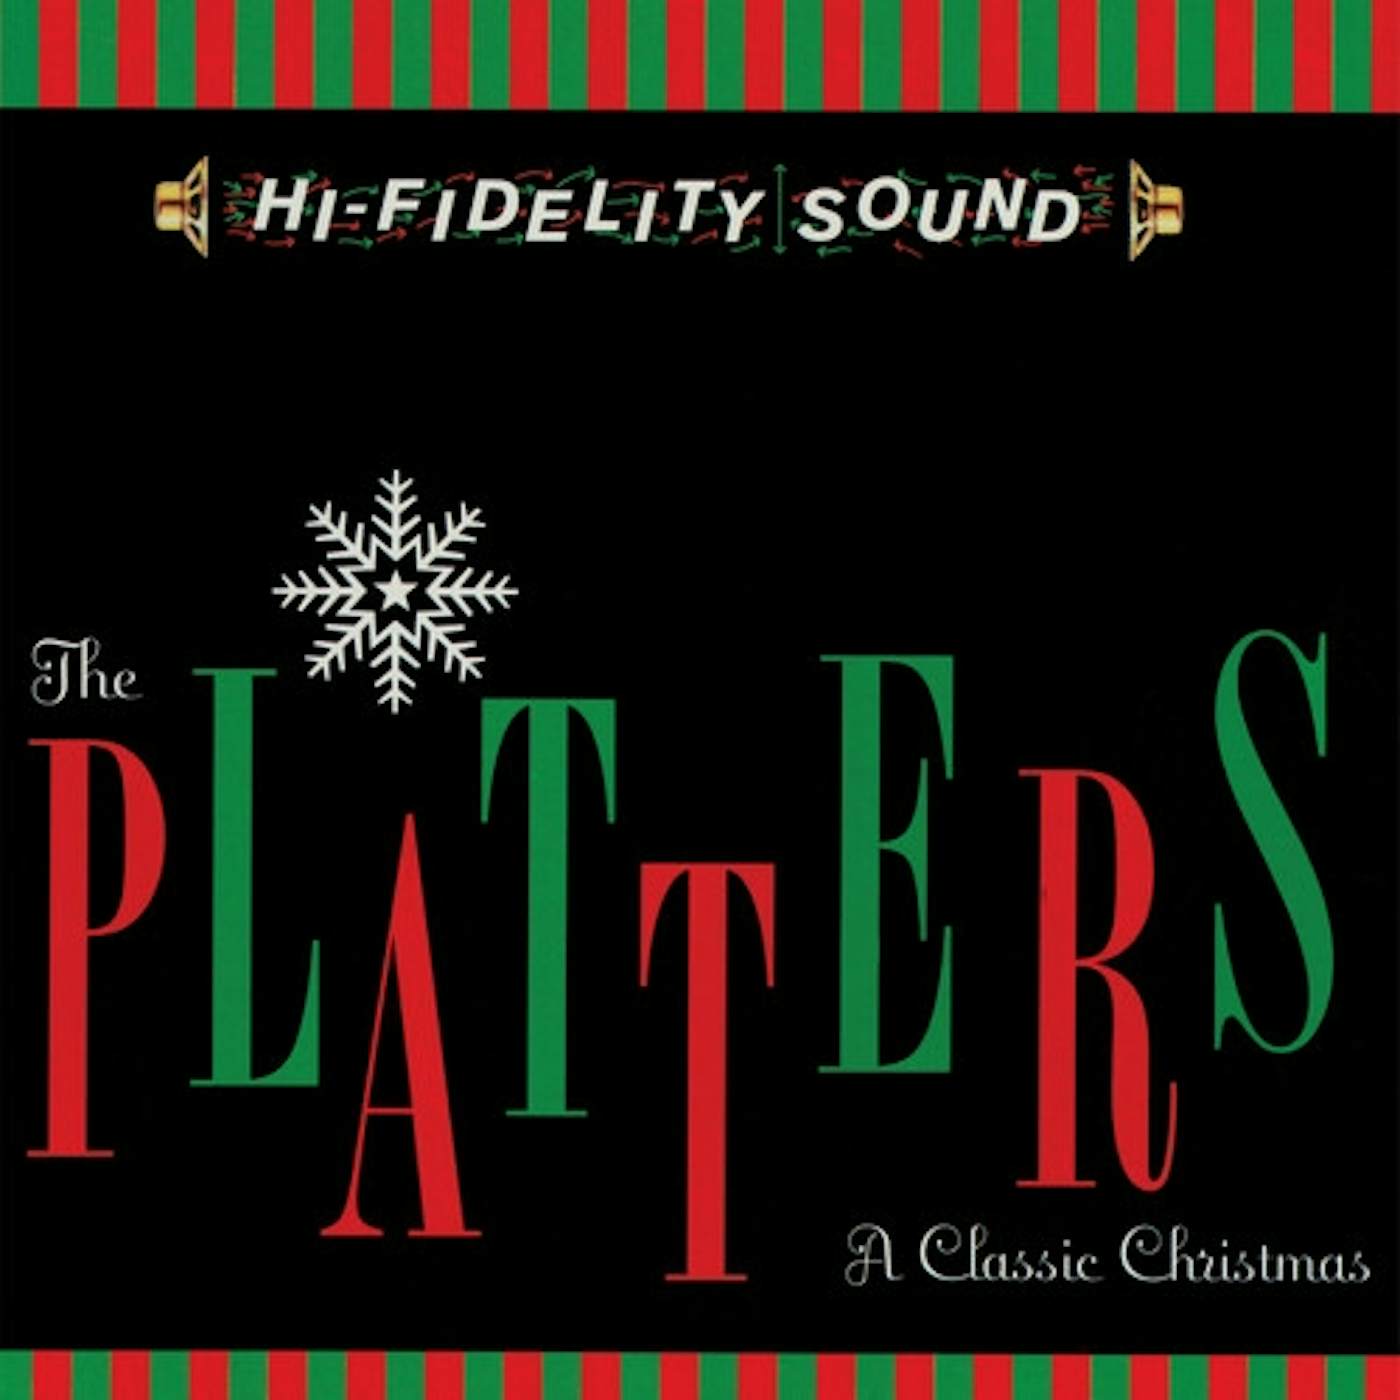 The Platters Classic Christmas (Red) Vinyl Record